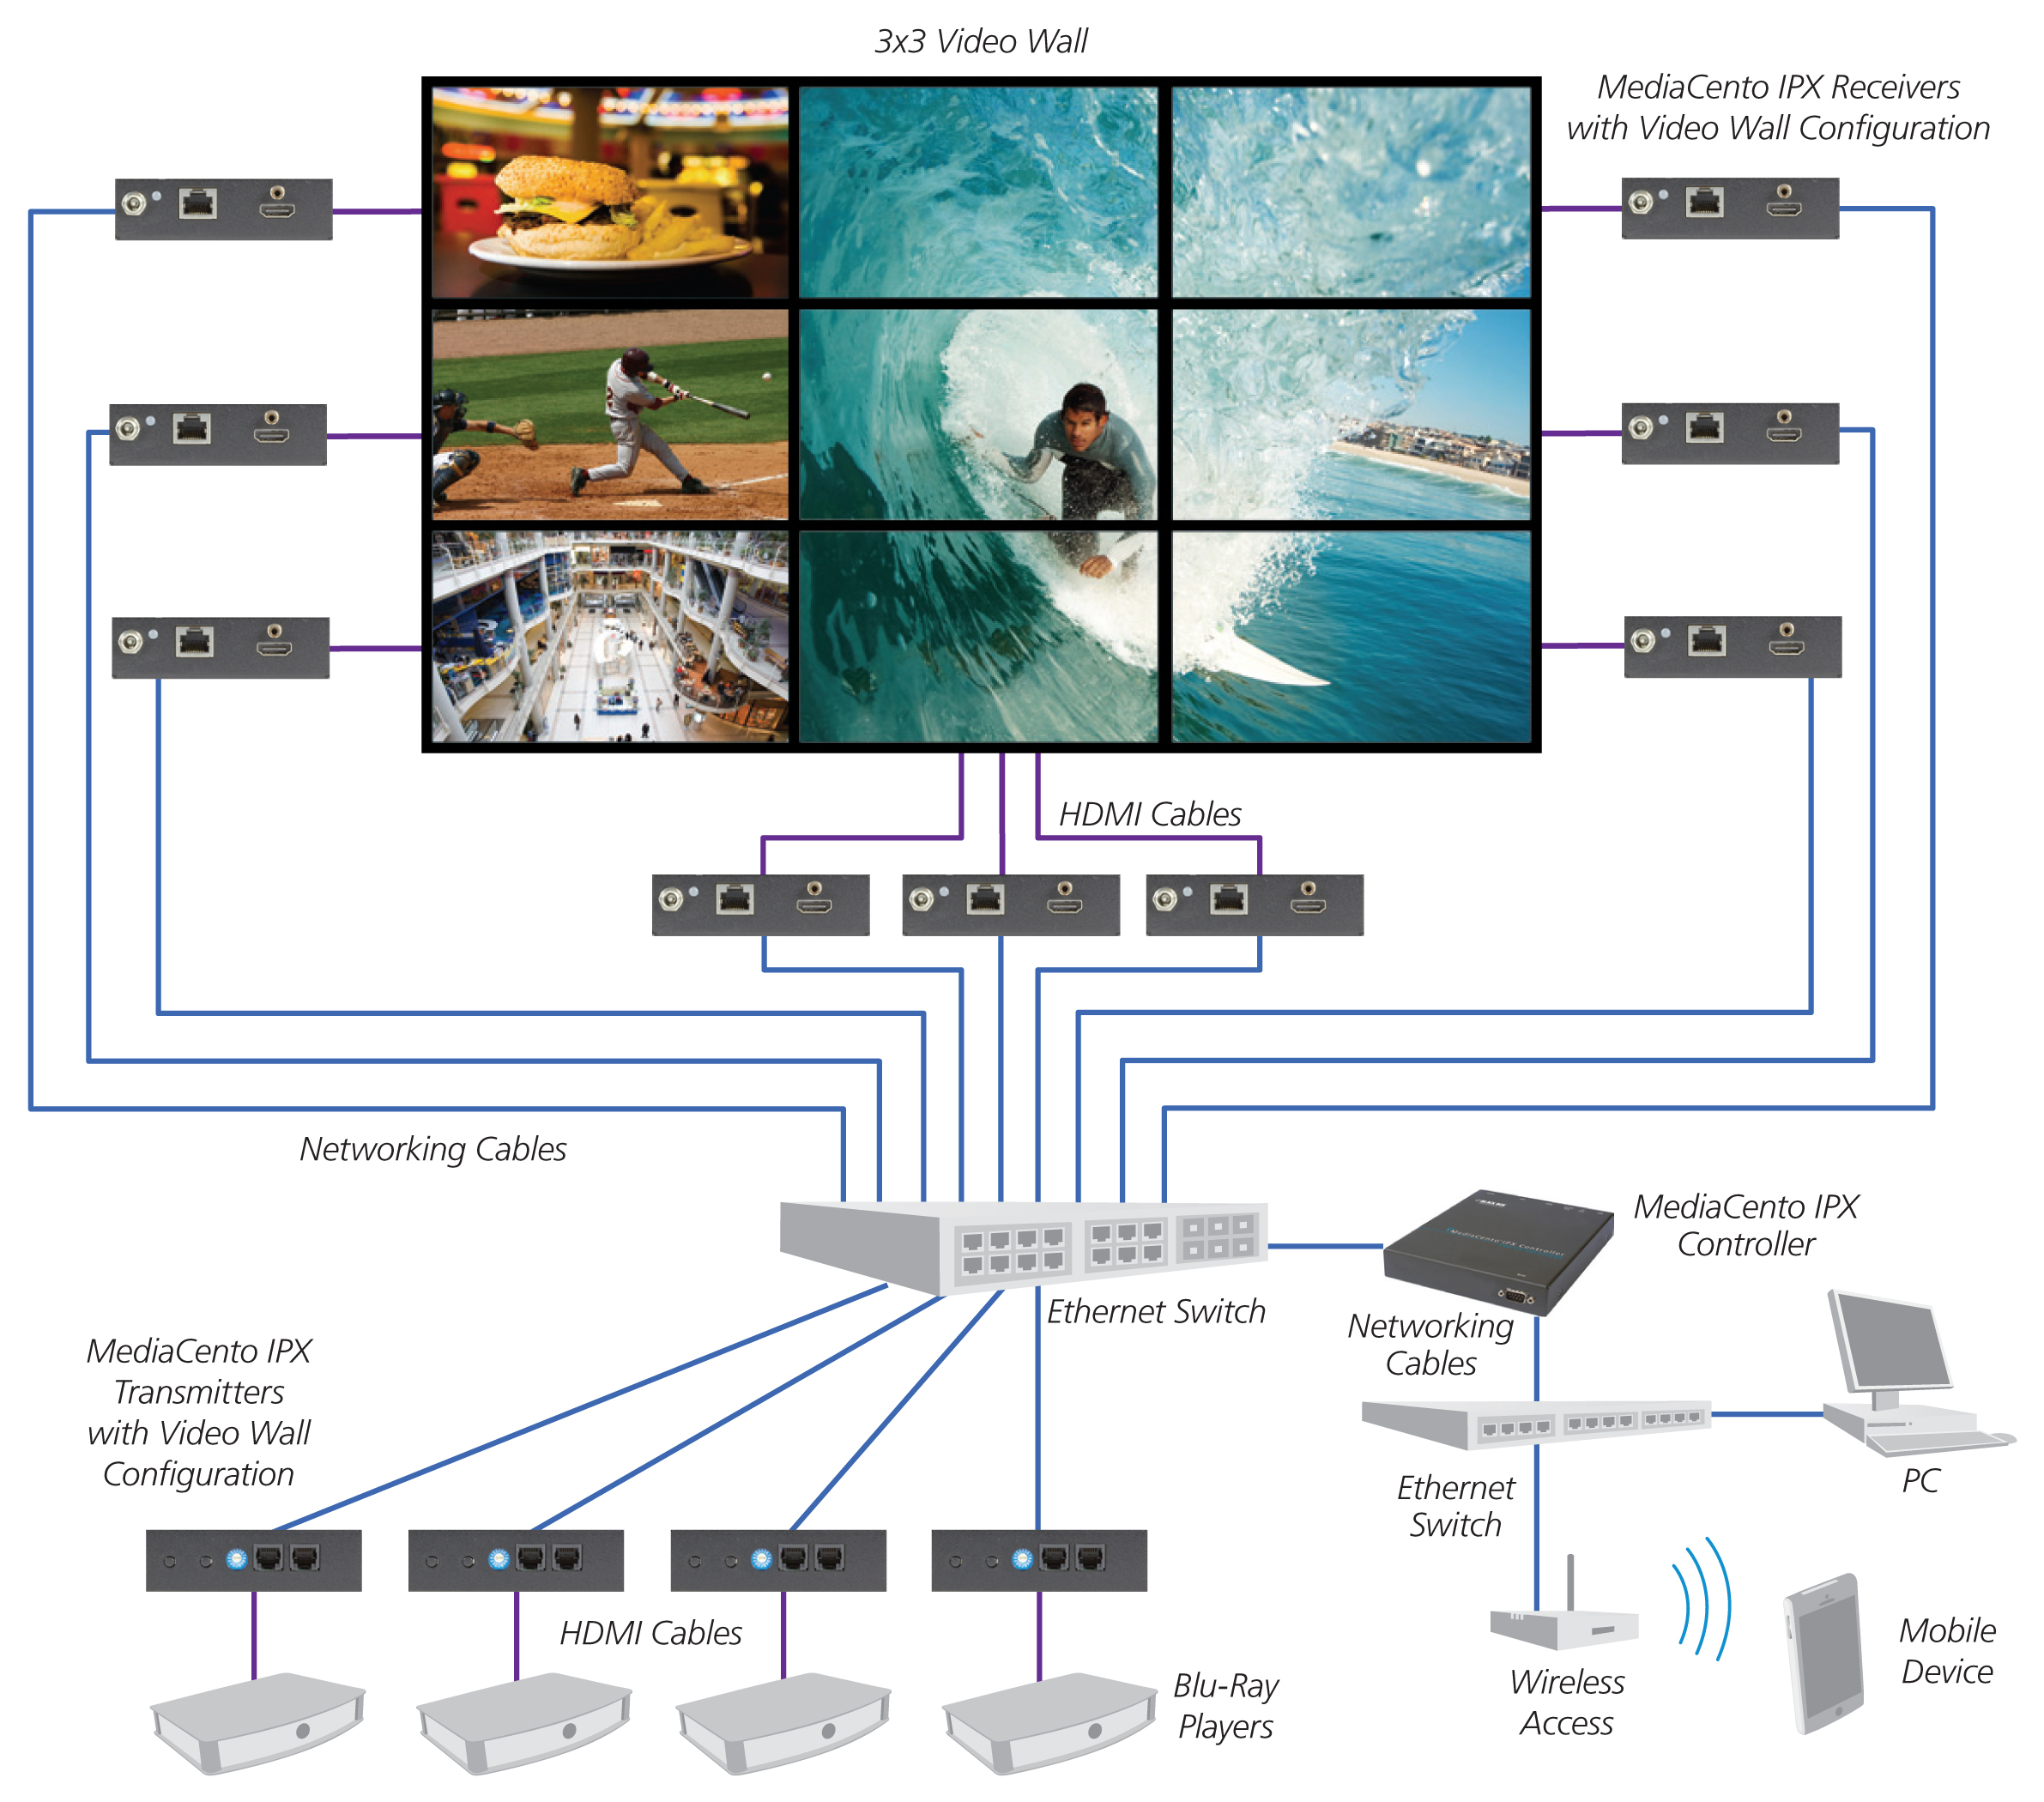 MediaCento Multicast mode application with video wall and matrix switching Configuration